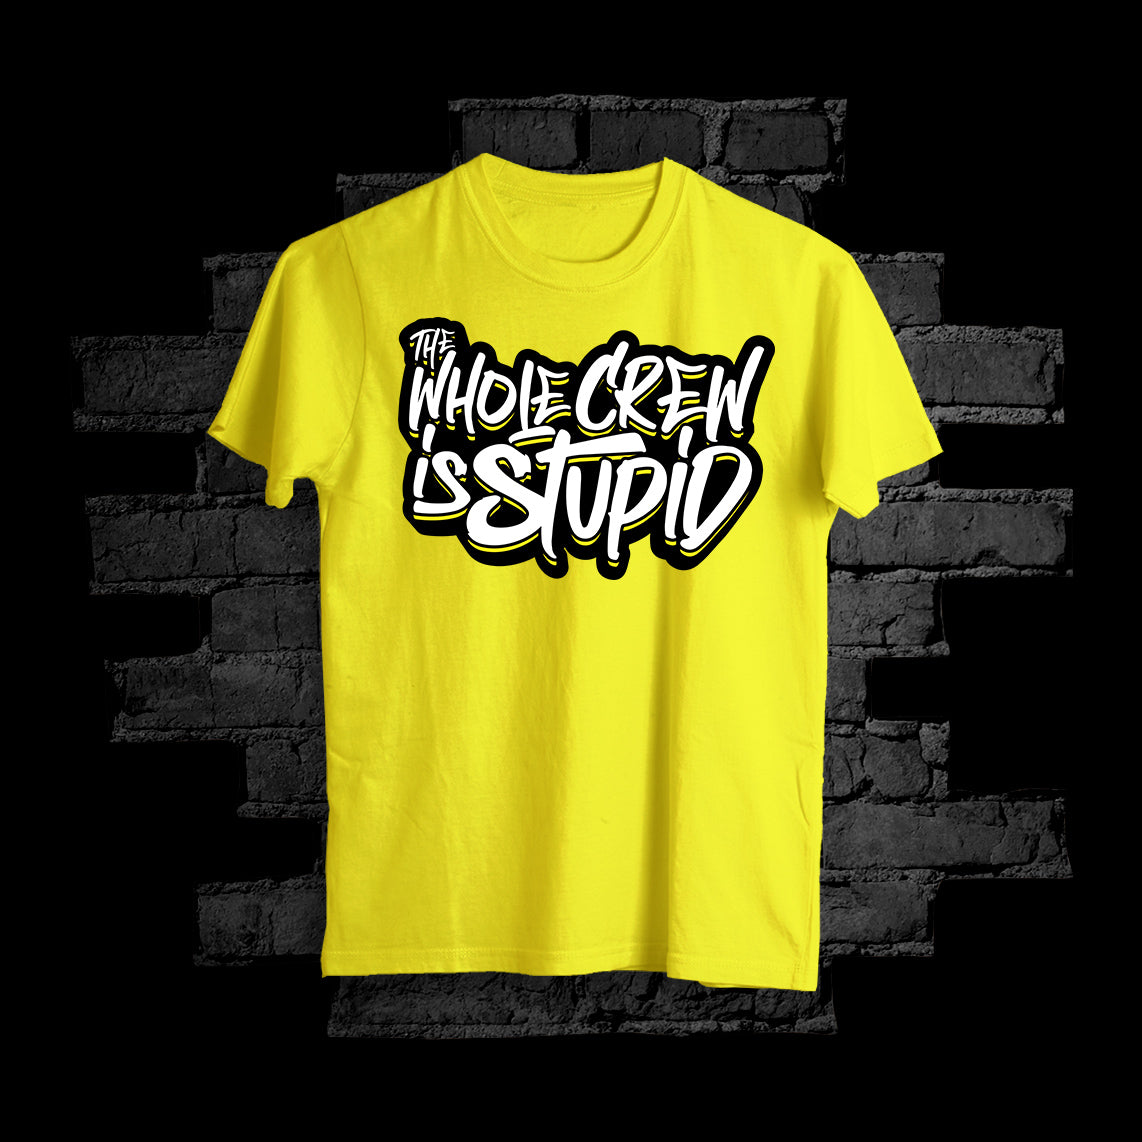 The Whole Crew is Stupid - Yellow